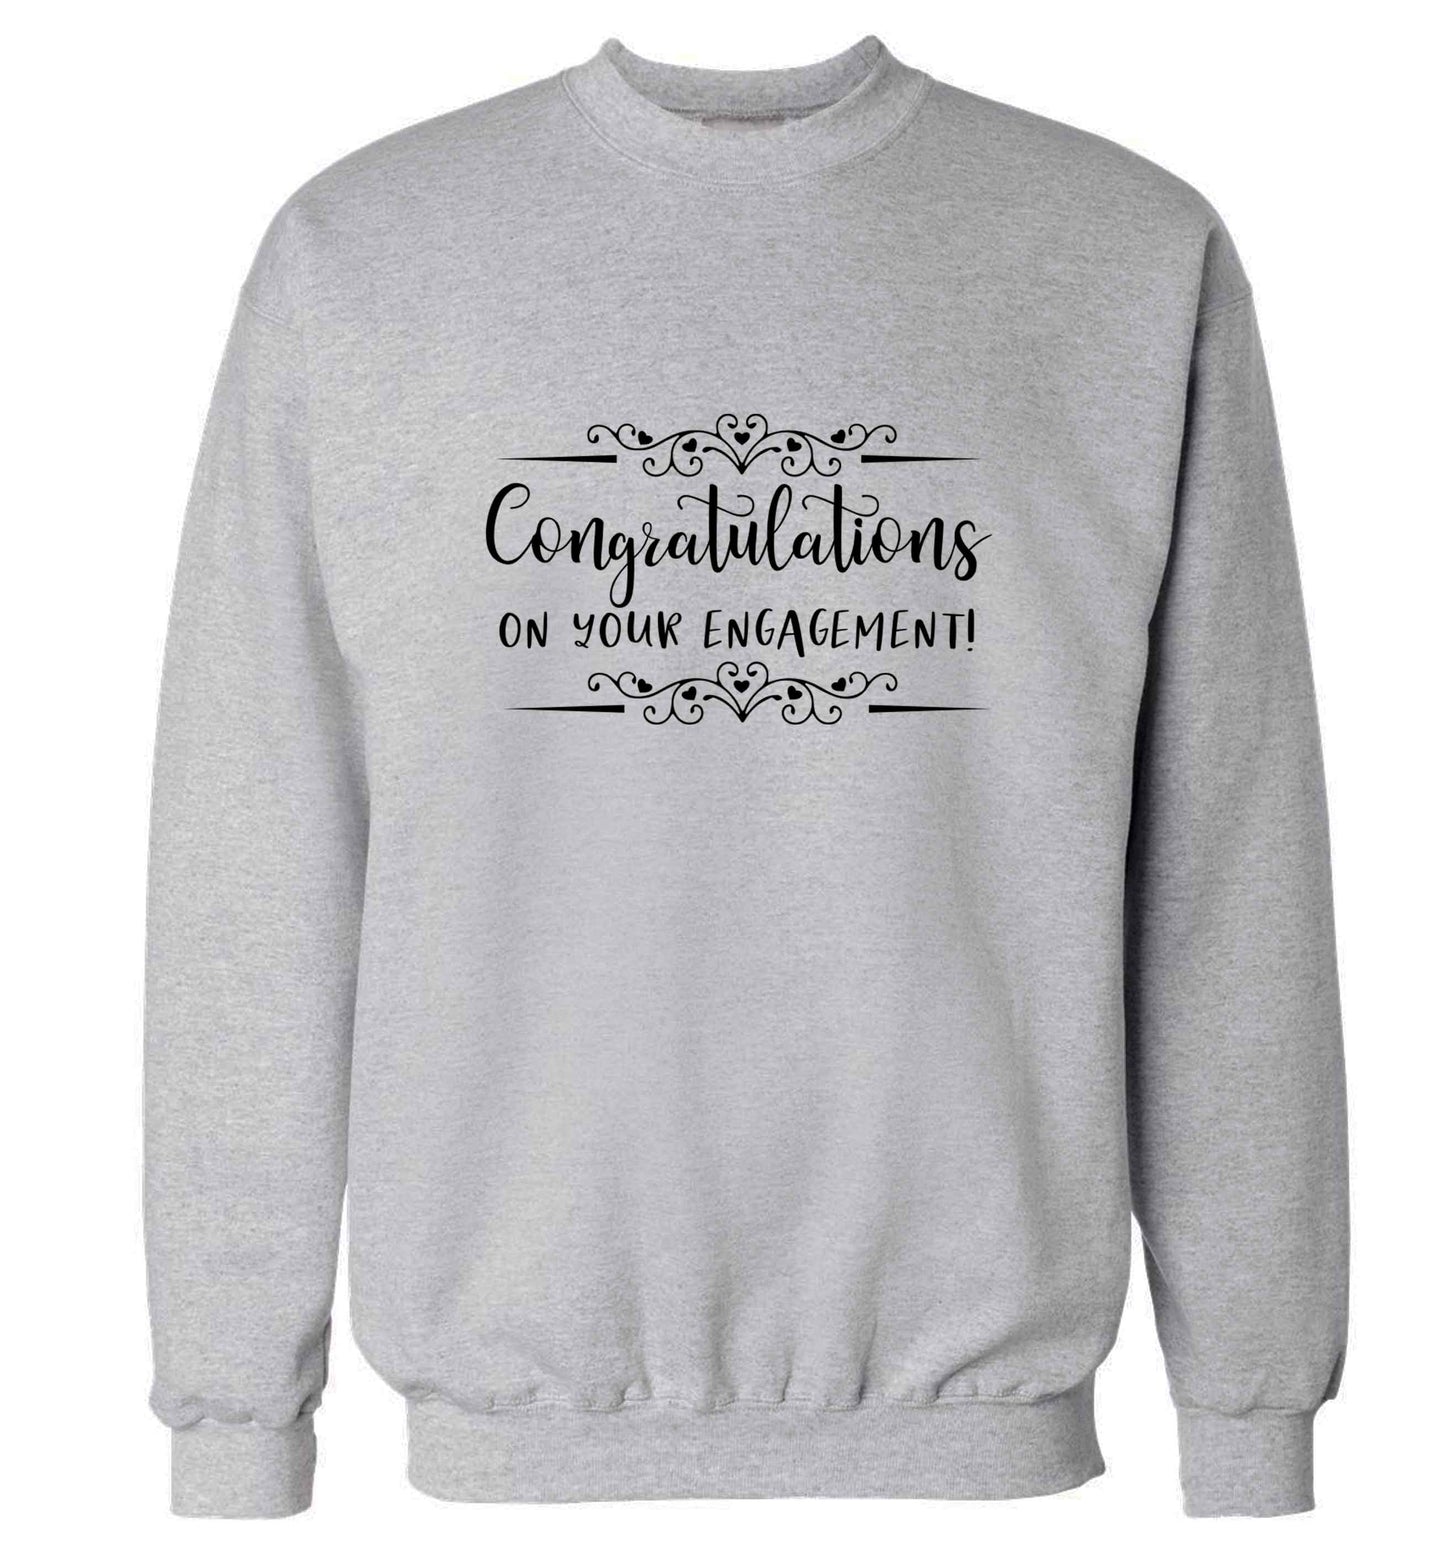 Congratulations on your engagement adult's unisex grey sweater 2XL